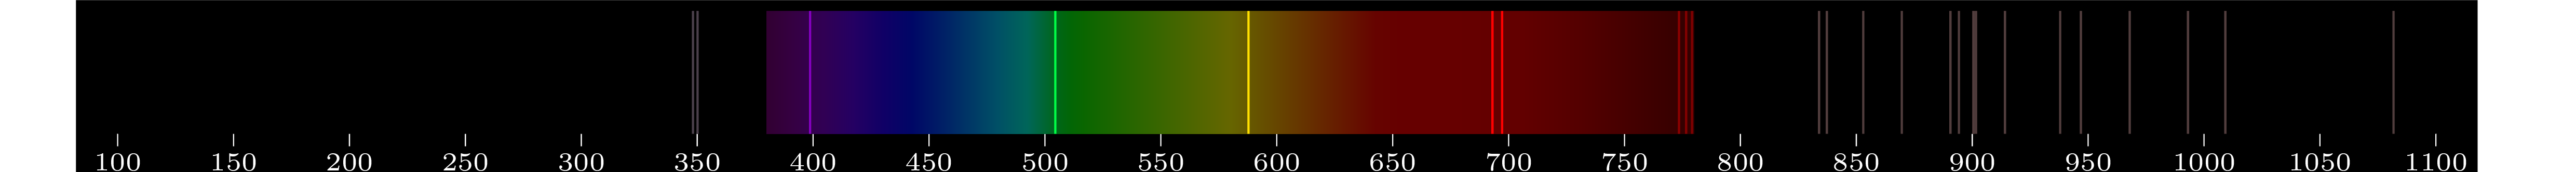 emmision spectra of element Np